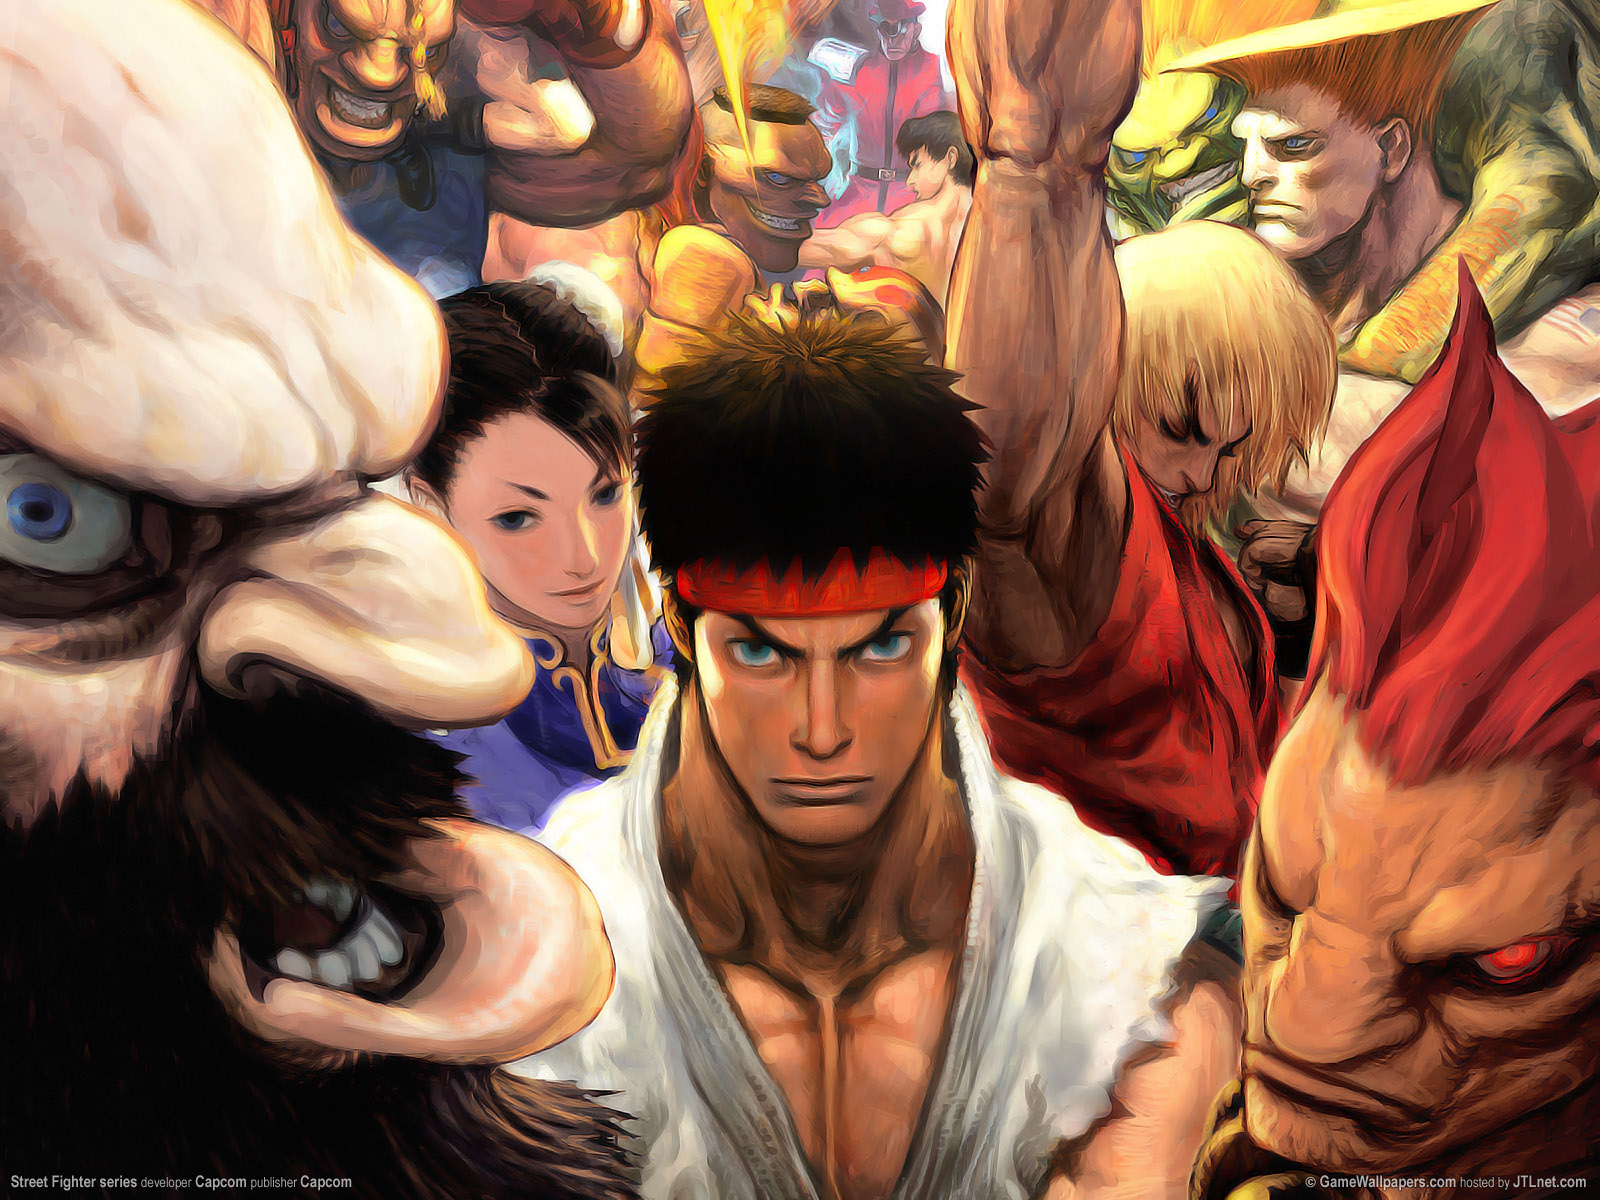 Street Fighter Wallpapers Funny Wallpapers Gallery - PC